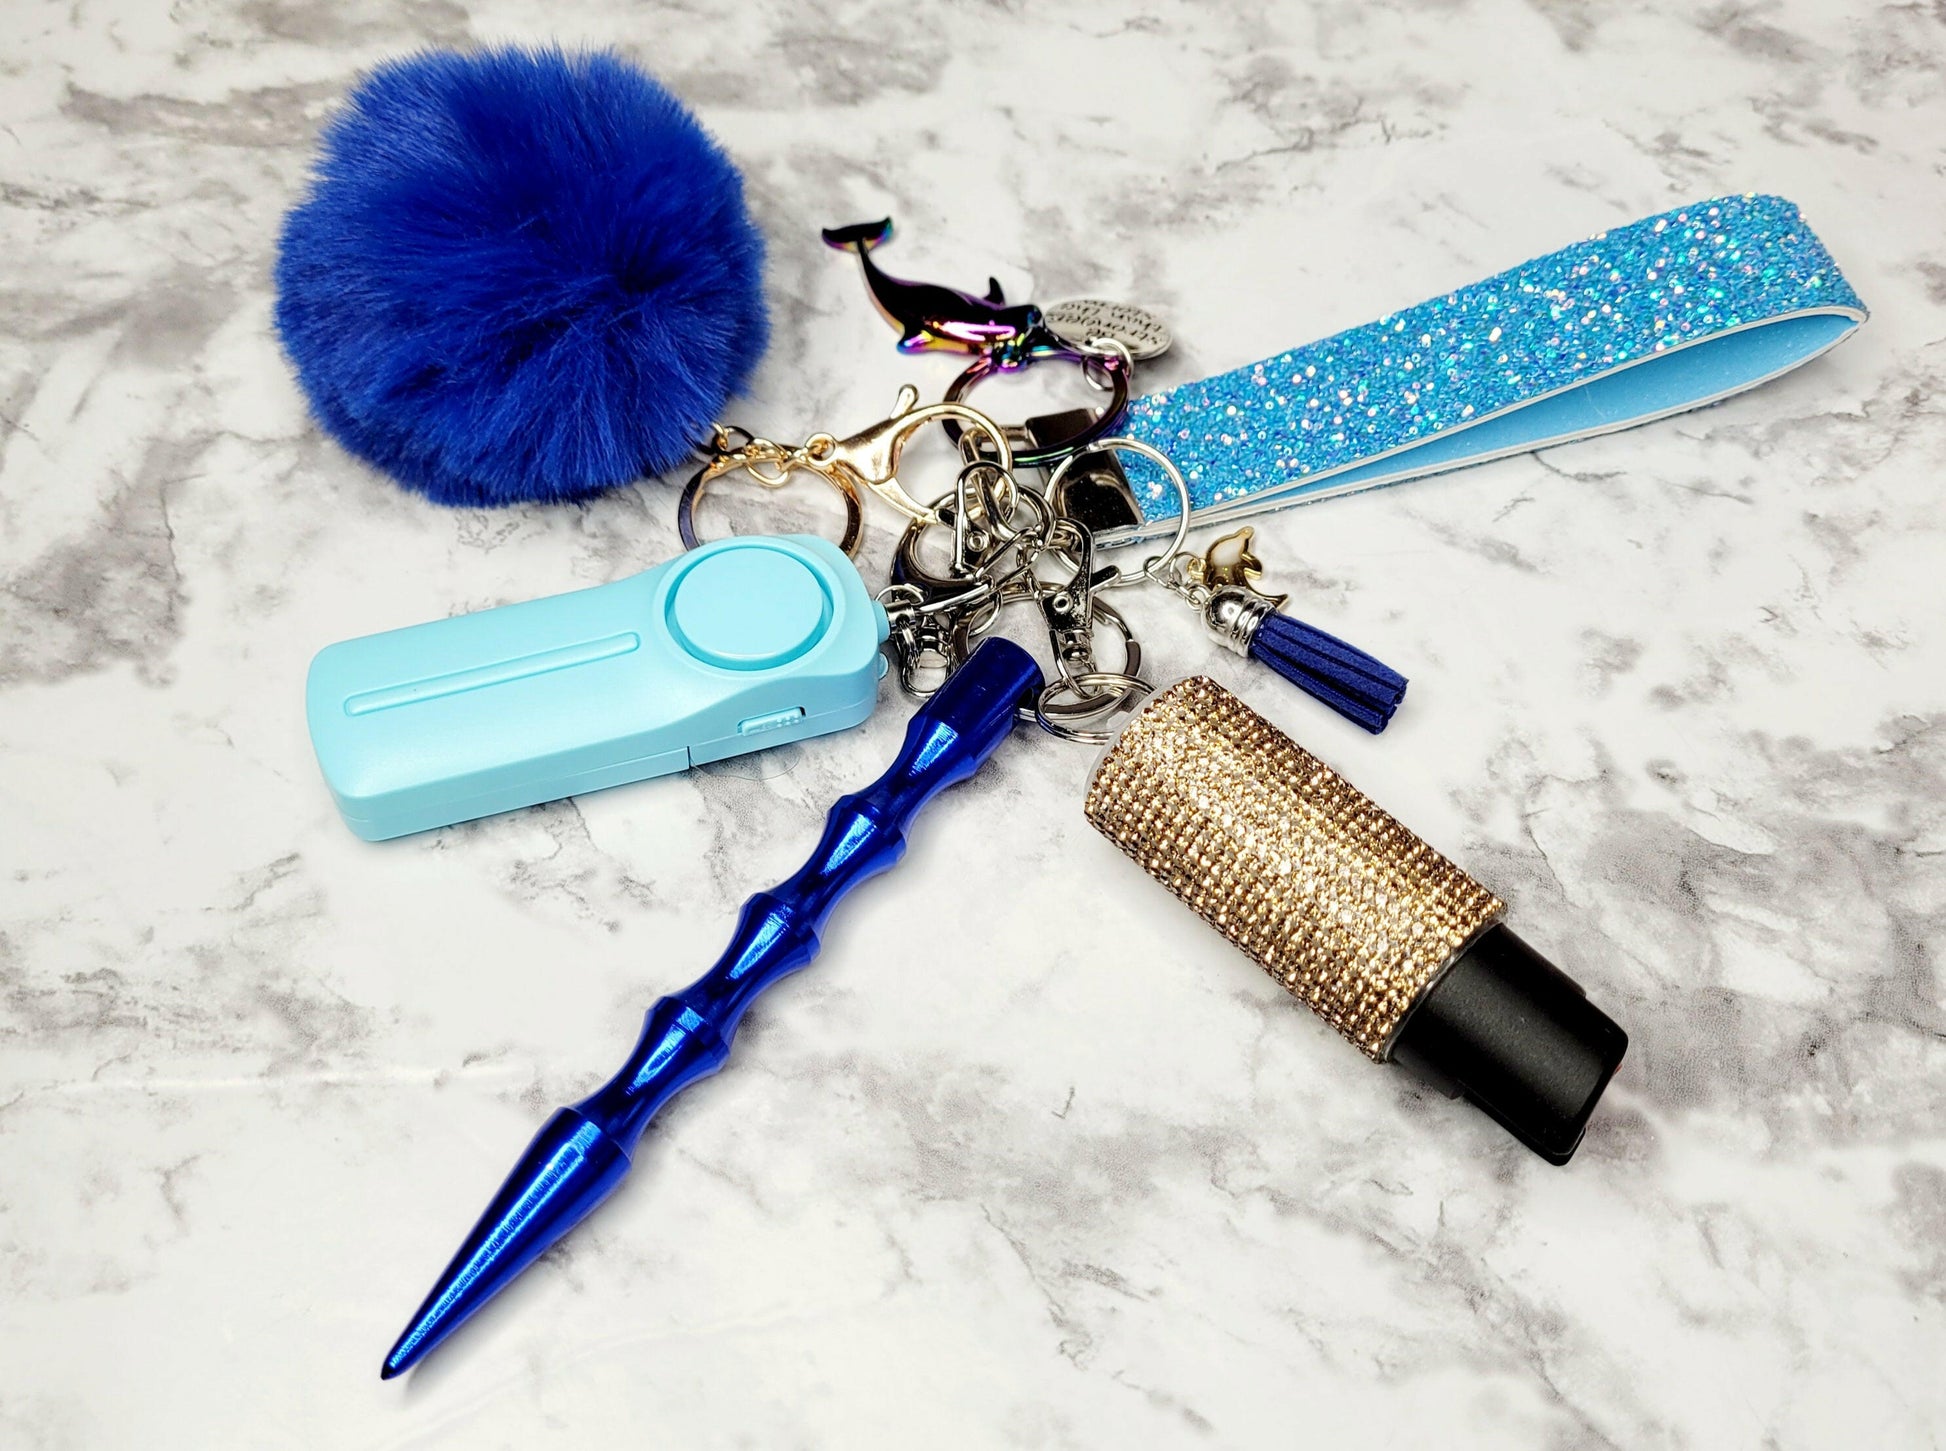 Dolphin Blue Faux Leather Gold Pepperspray Iridescent Pendant Self-Defense Keychain.